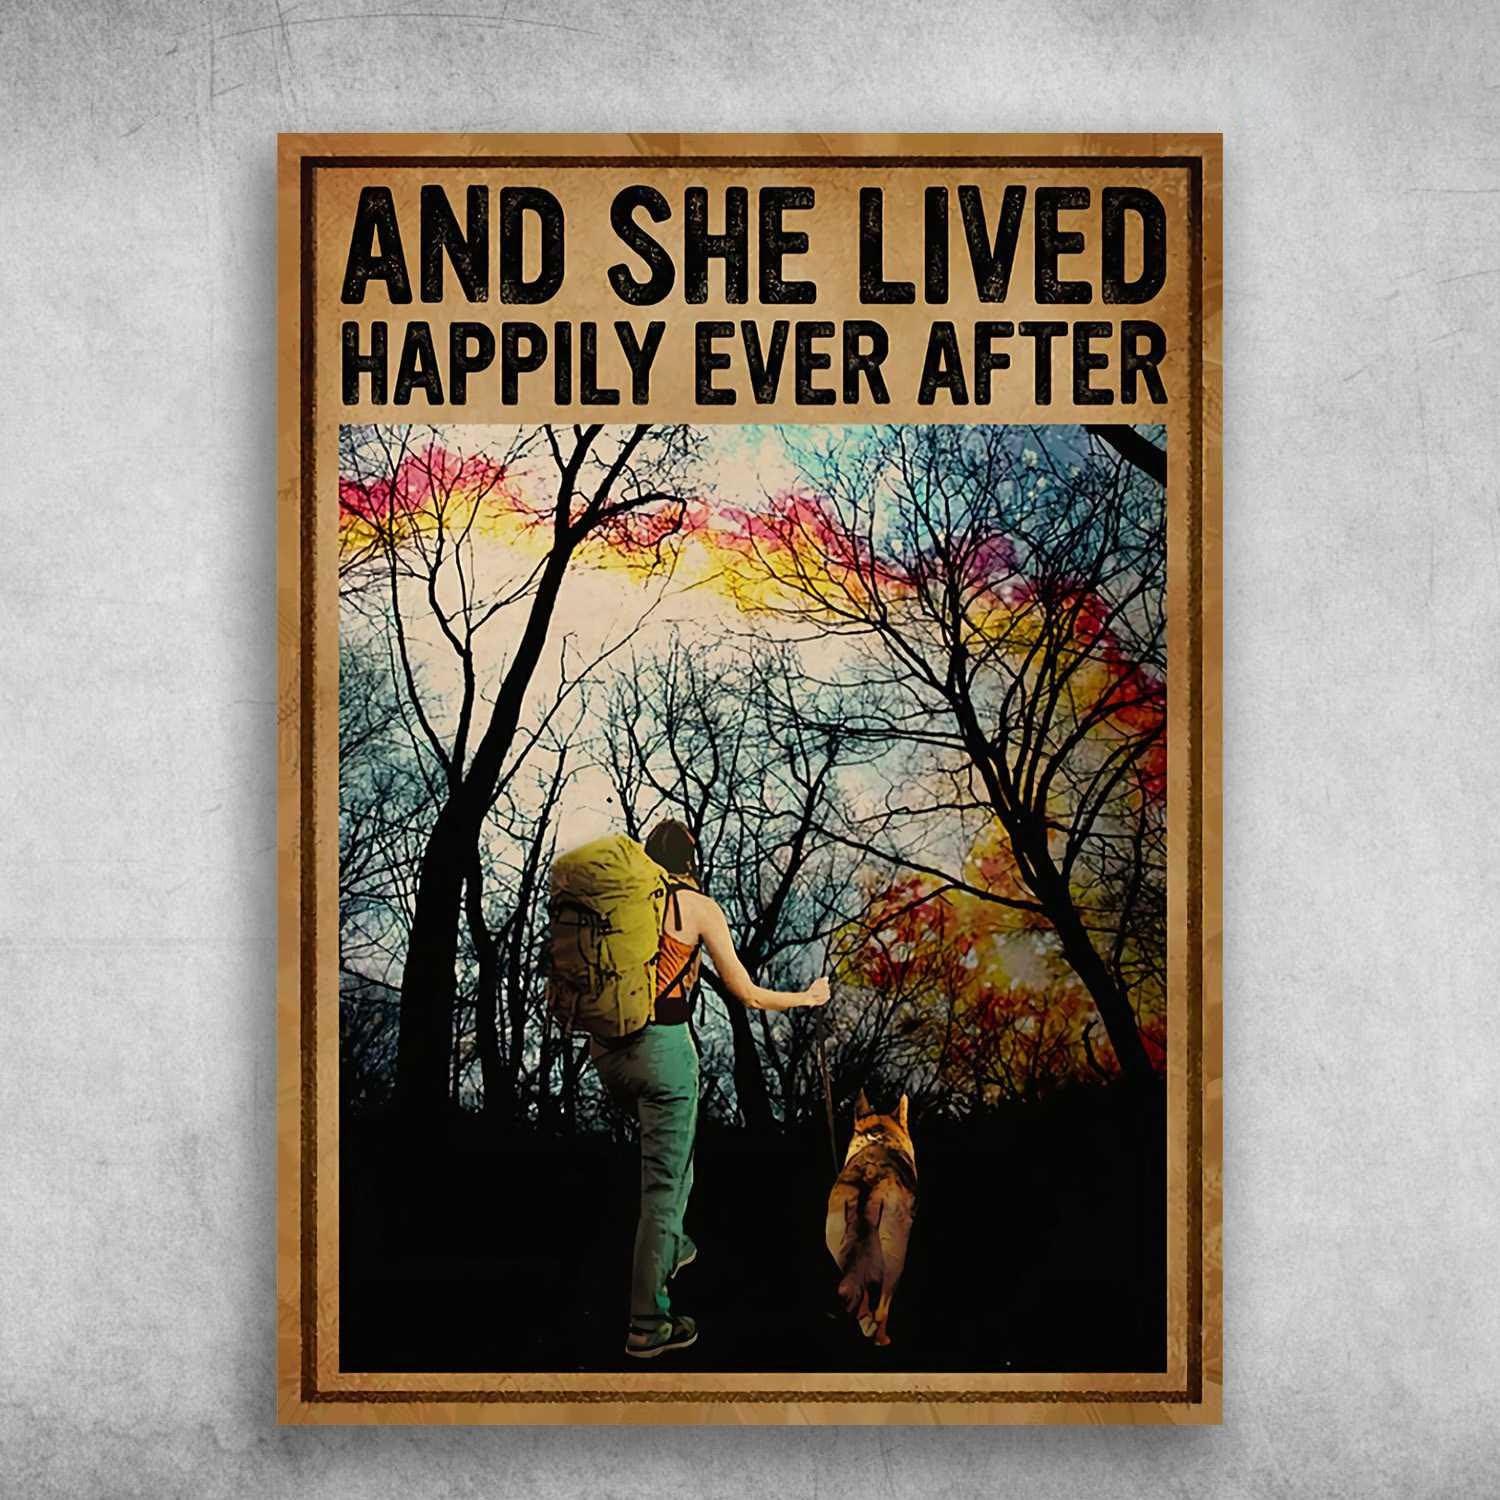 Hiking With Dog Portrait Canvas - Hiking With Dog And She Lived Happily Ever After Premium Wrapped Canvas - Gift For Wife, Mom, Hiking Lover - Amzanimalsgift